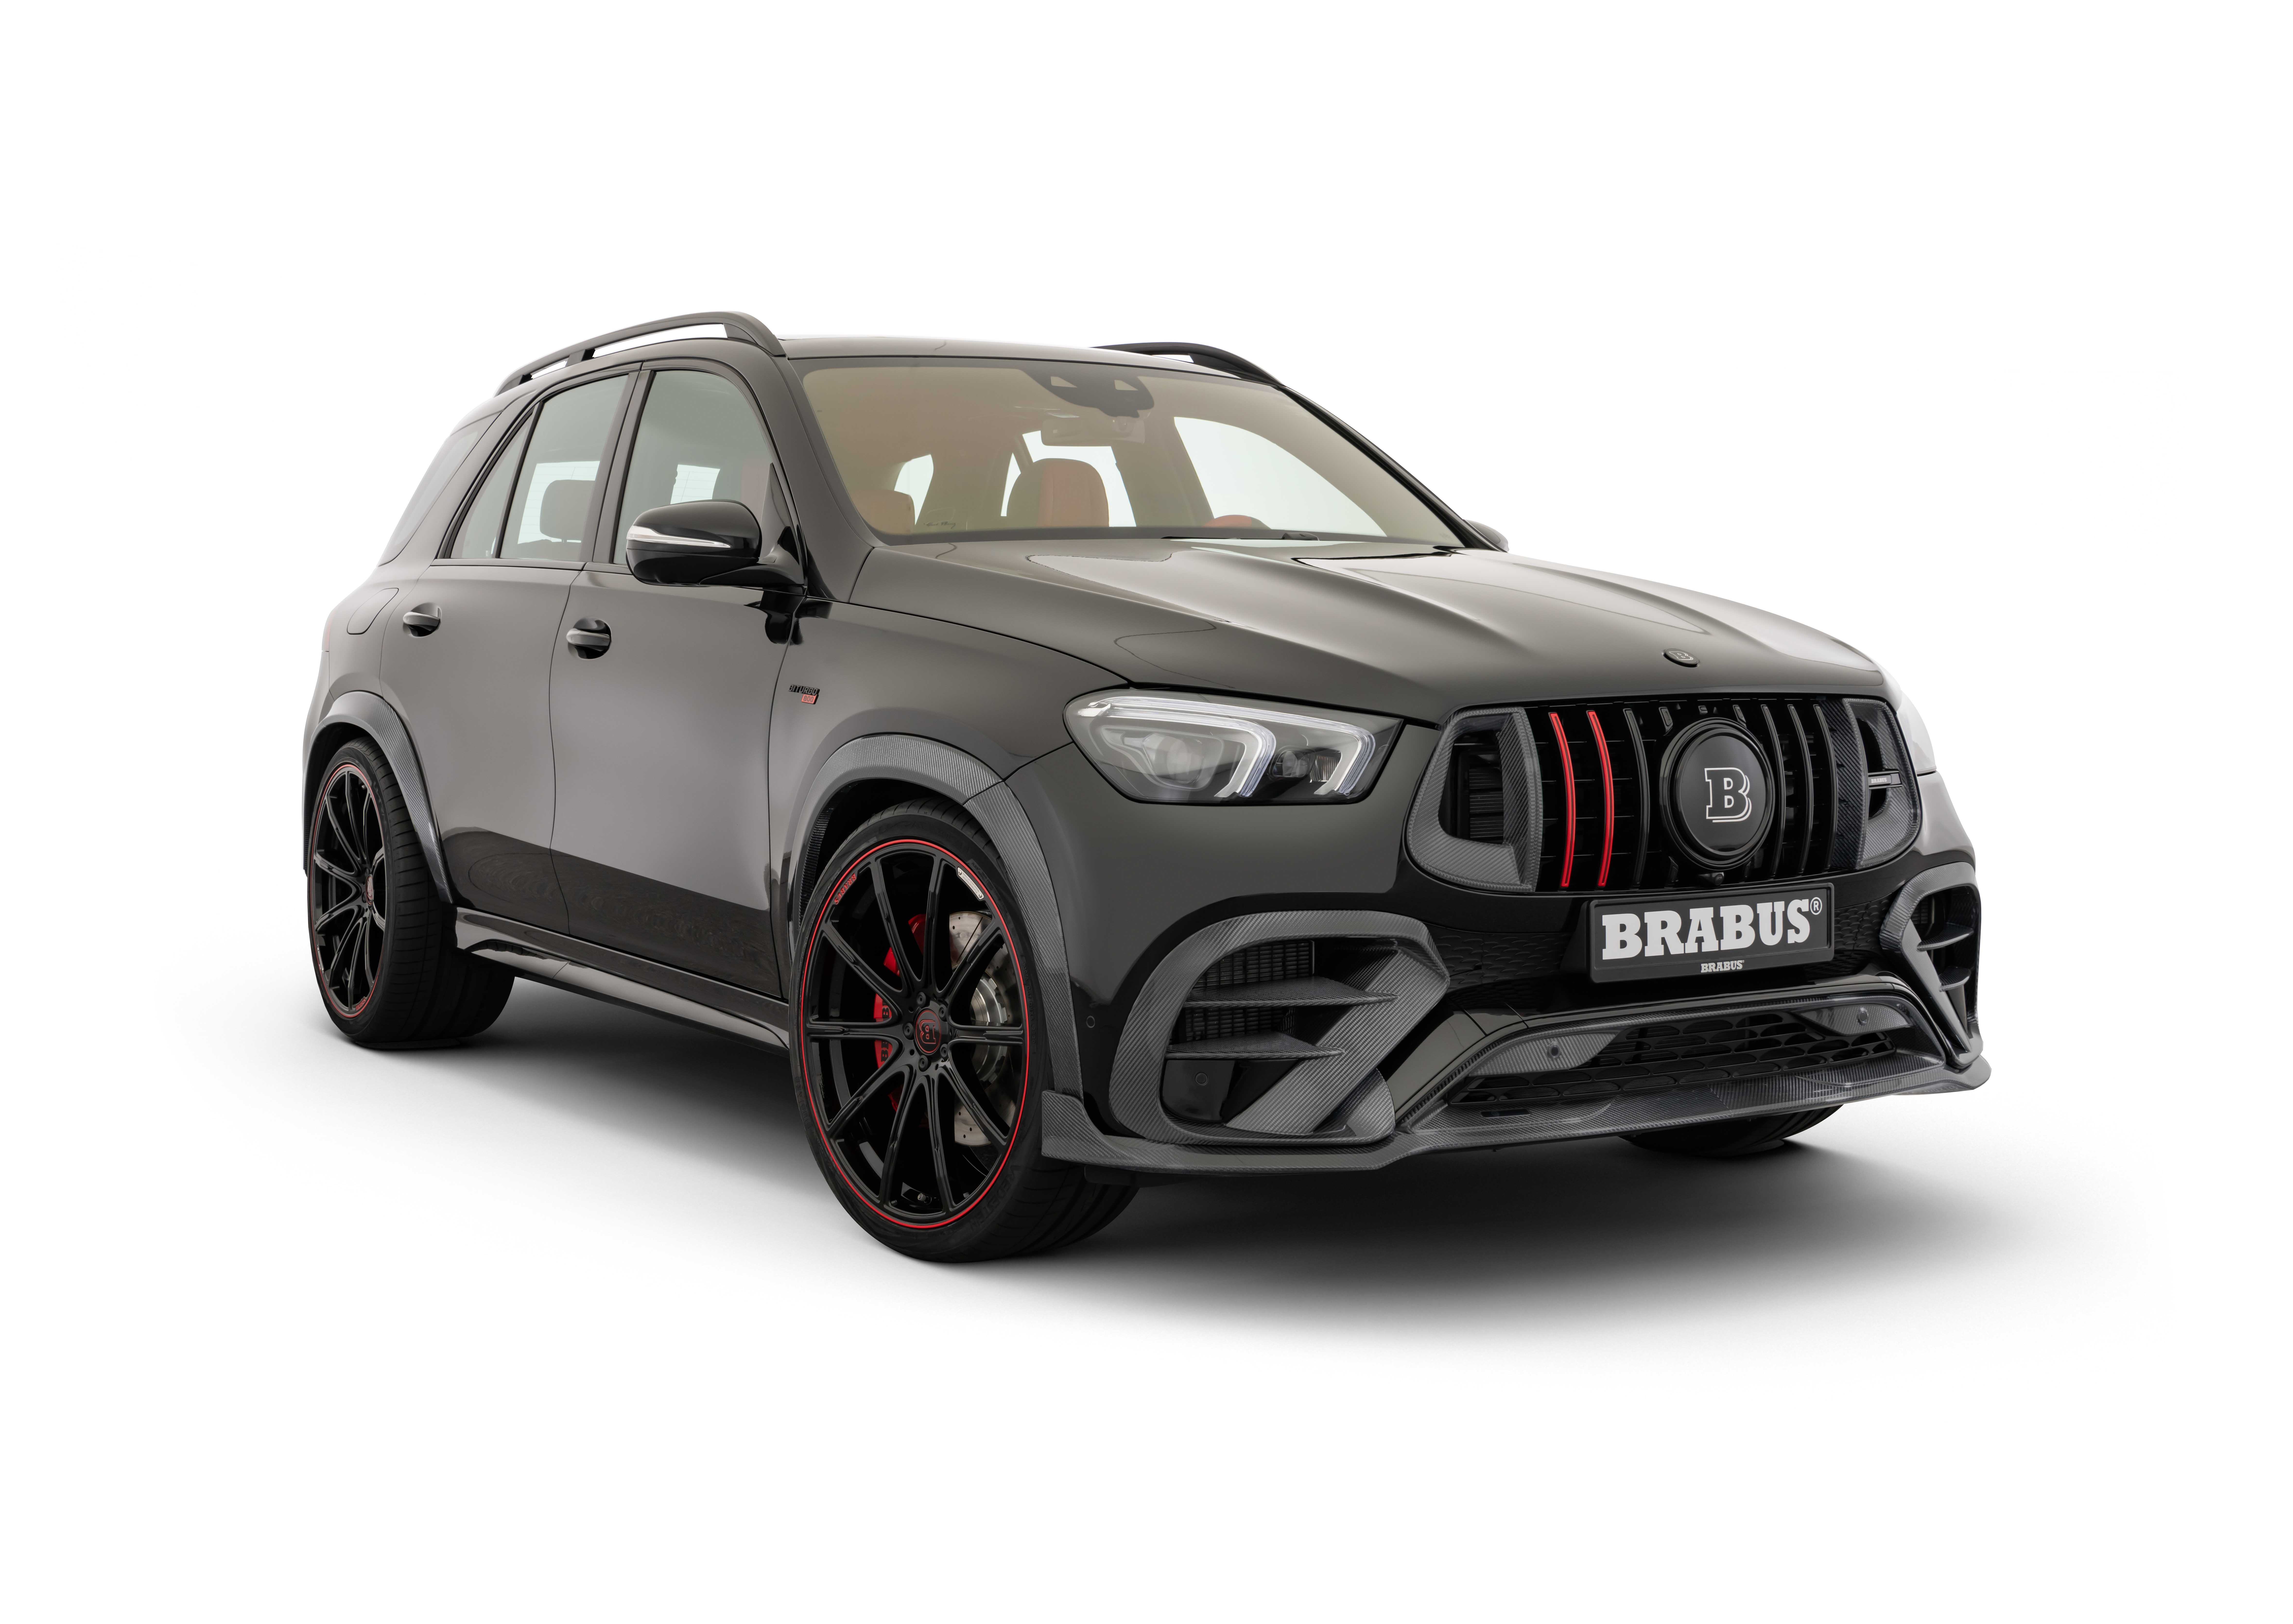 The new high-performance supercar based on the Mercedes-AMG GLE 63 S 4MATIC+